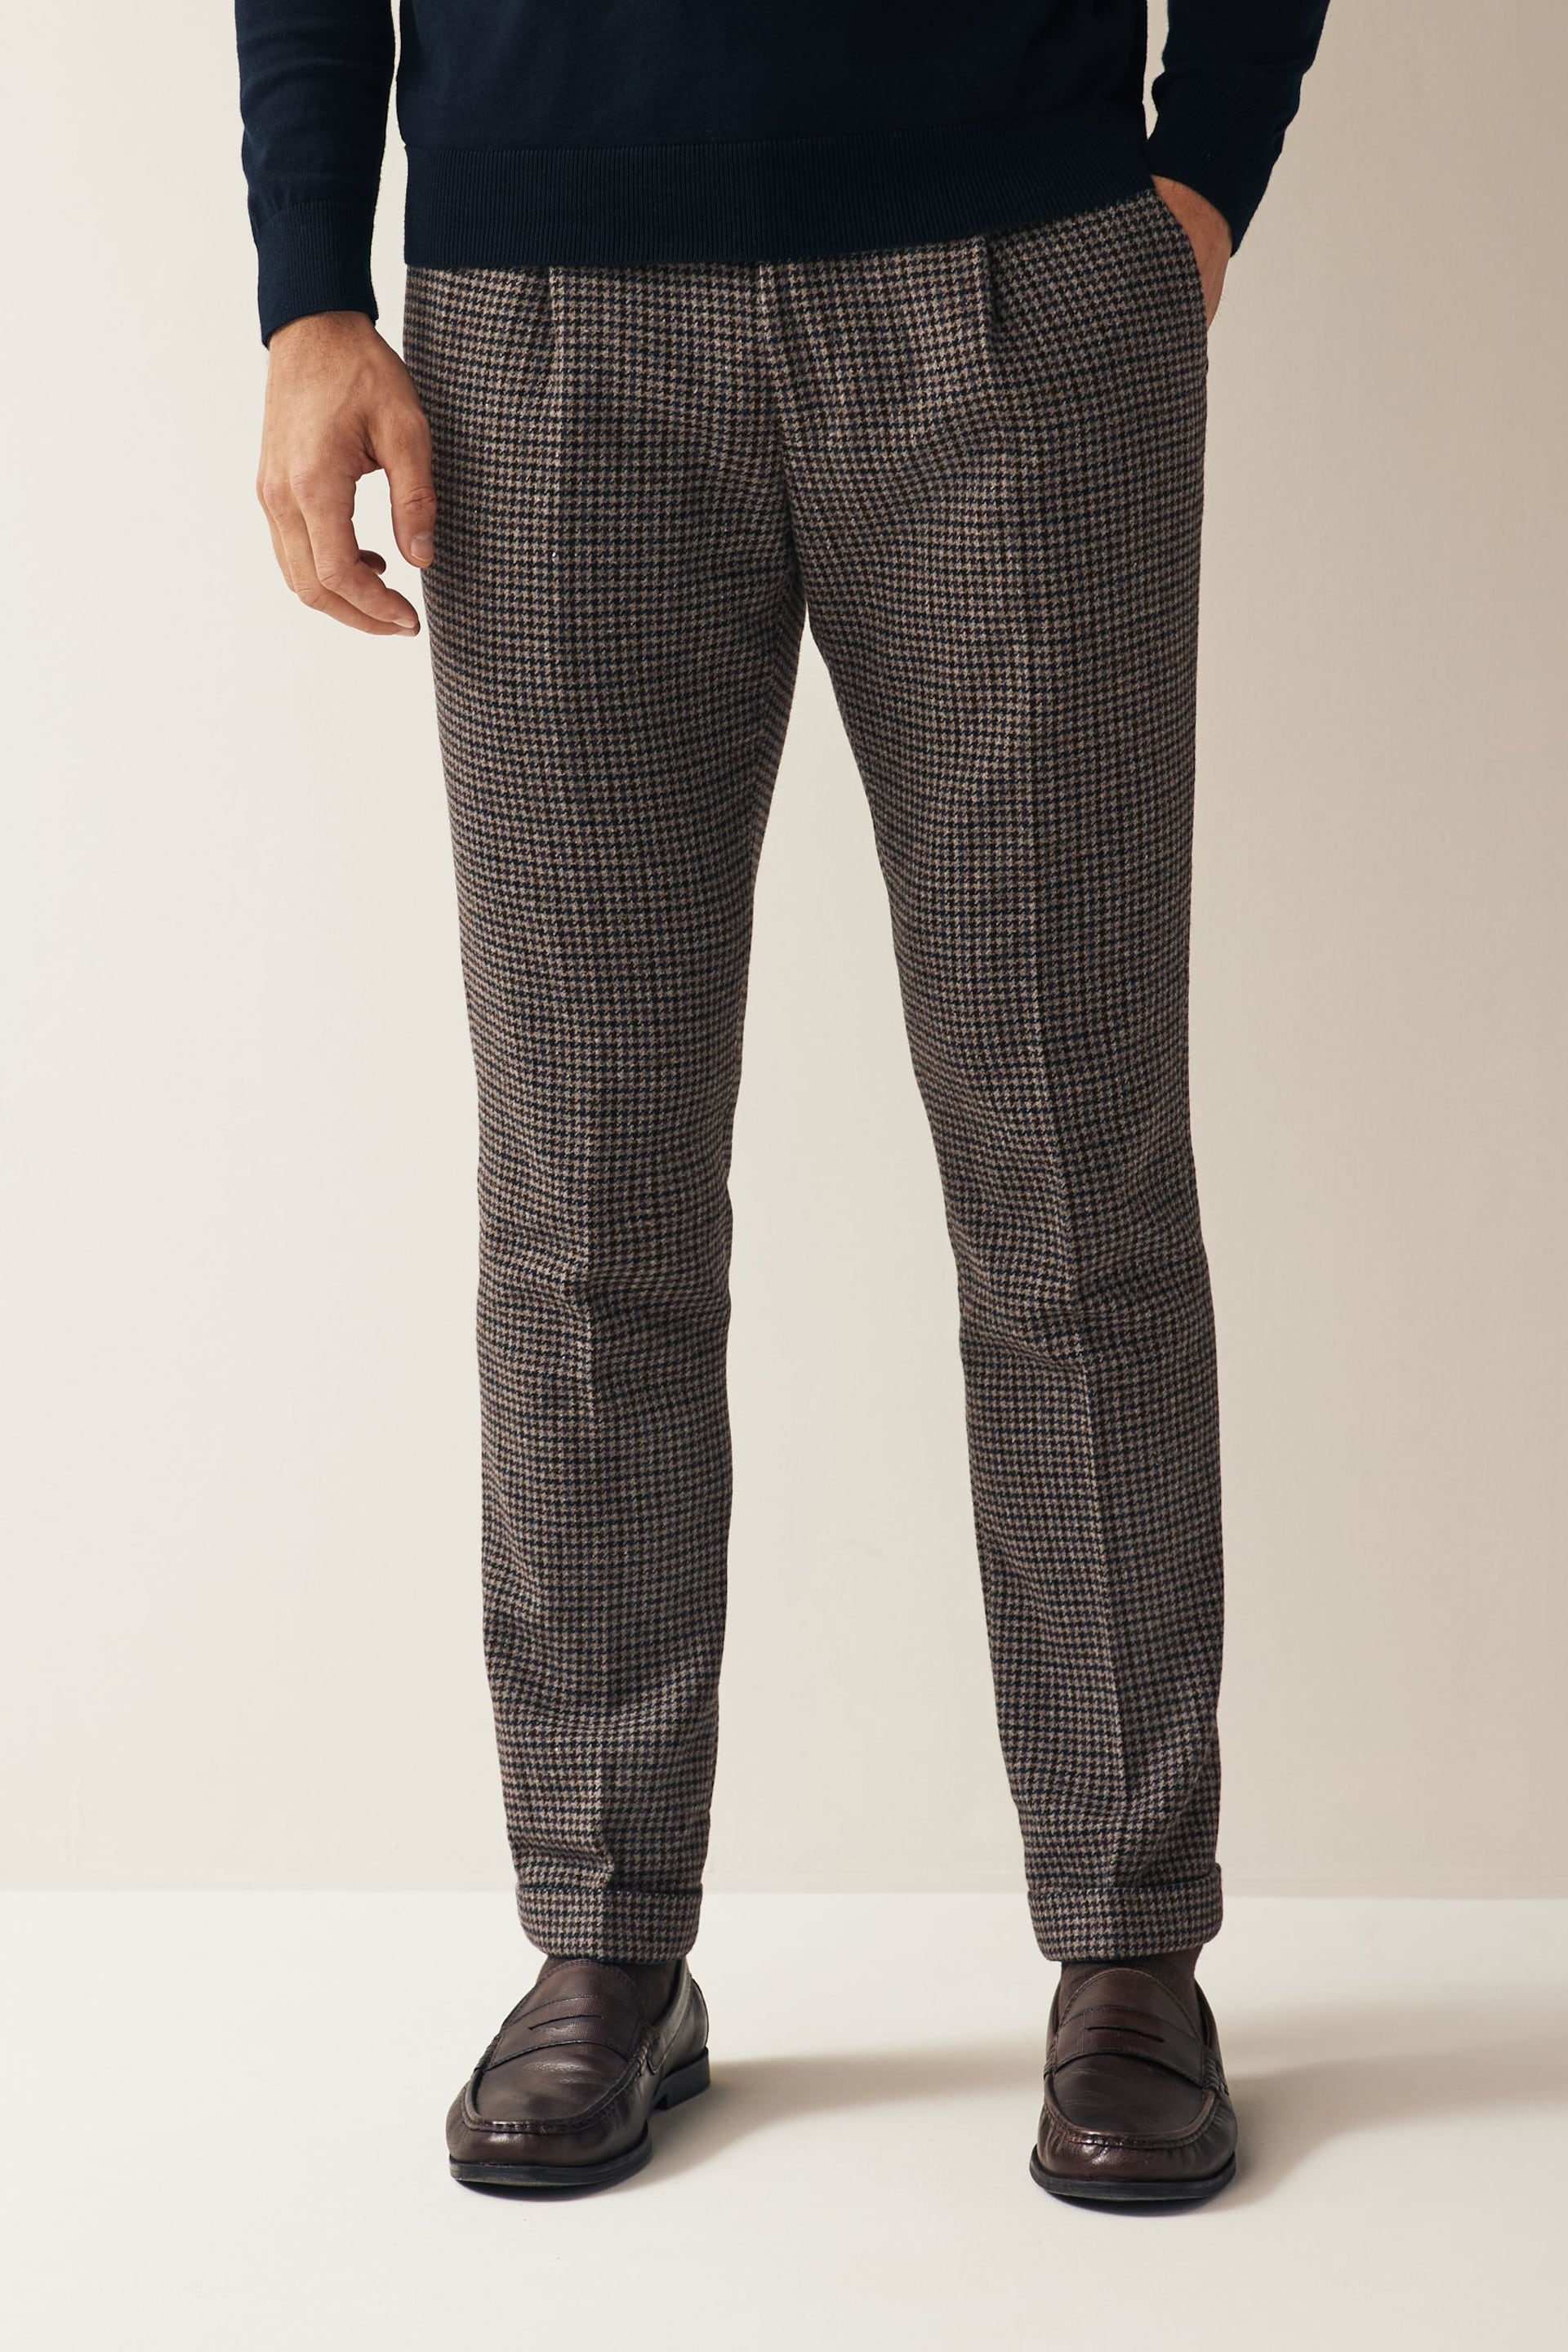 Brown Slim Wool Blend Puppytooth Suit Trousers - Image 1 of 9